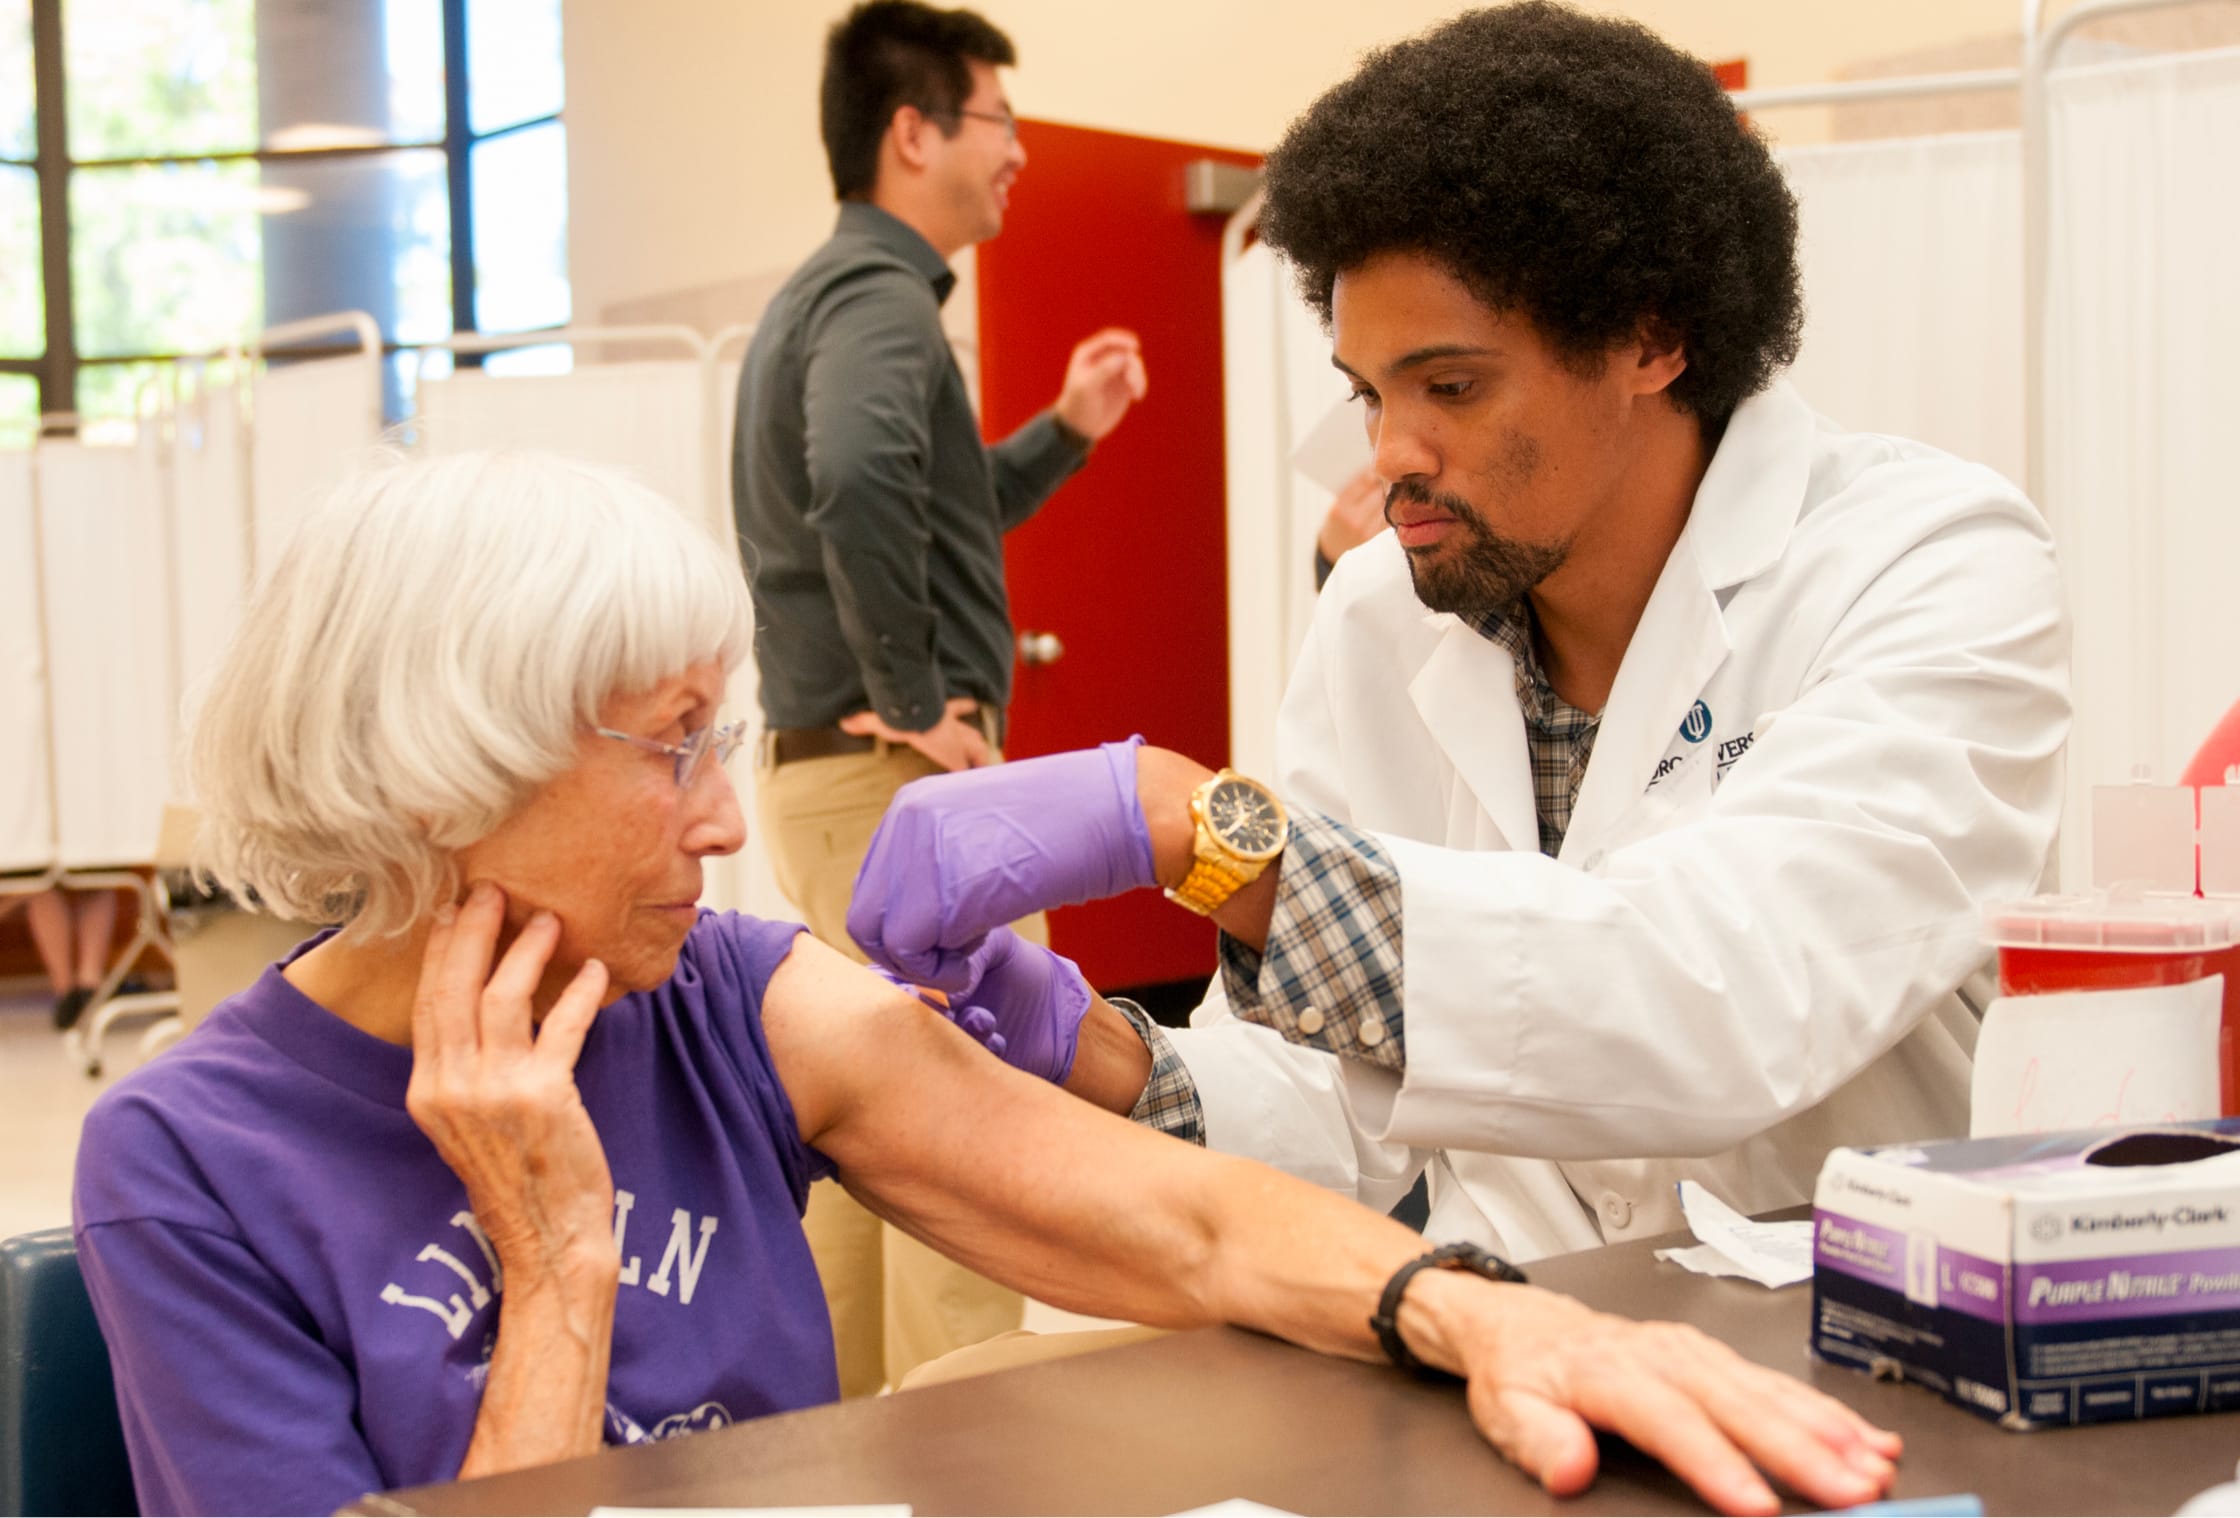 TUC pharmacy student administering a vaccine to a senior woman